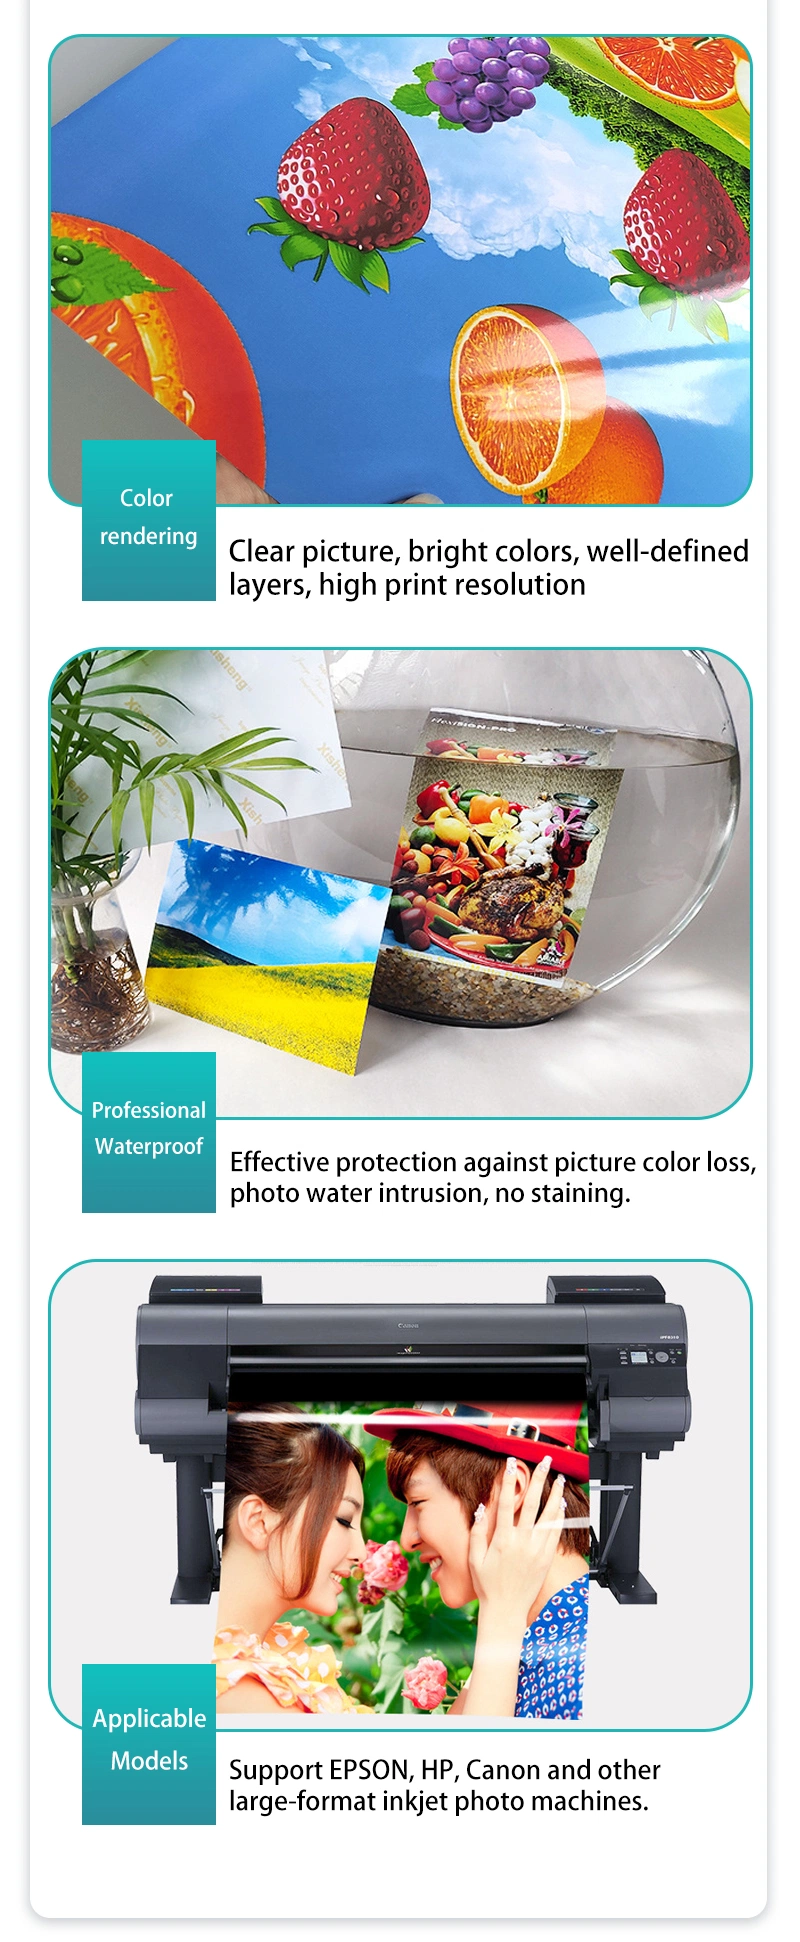 Glossy Surface Self-Adhesive Water-Based RC Photo Paper for Digital Printing